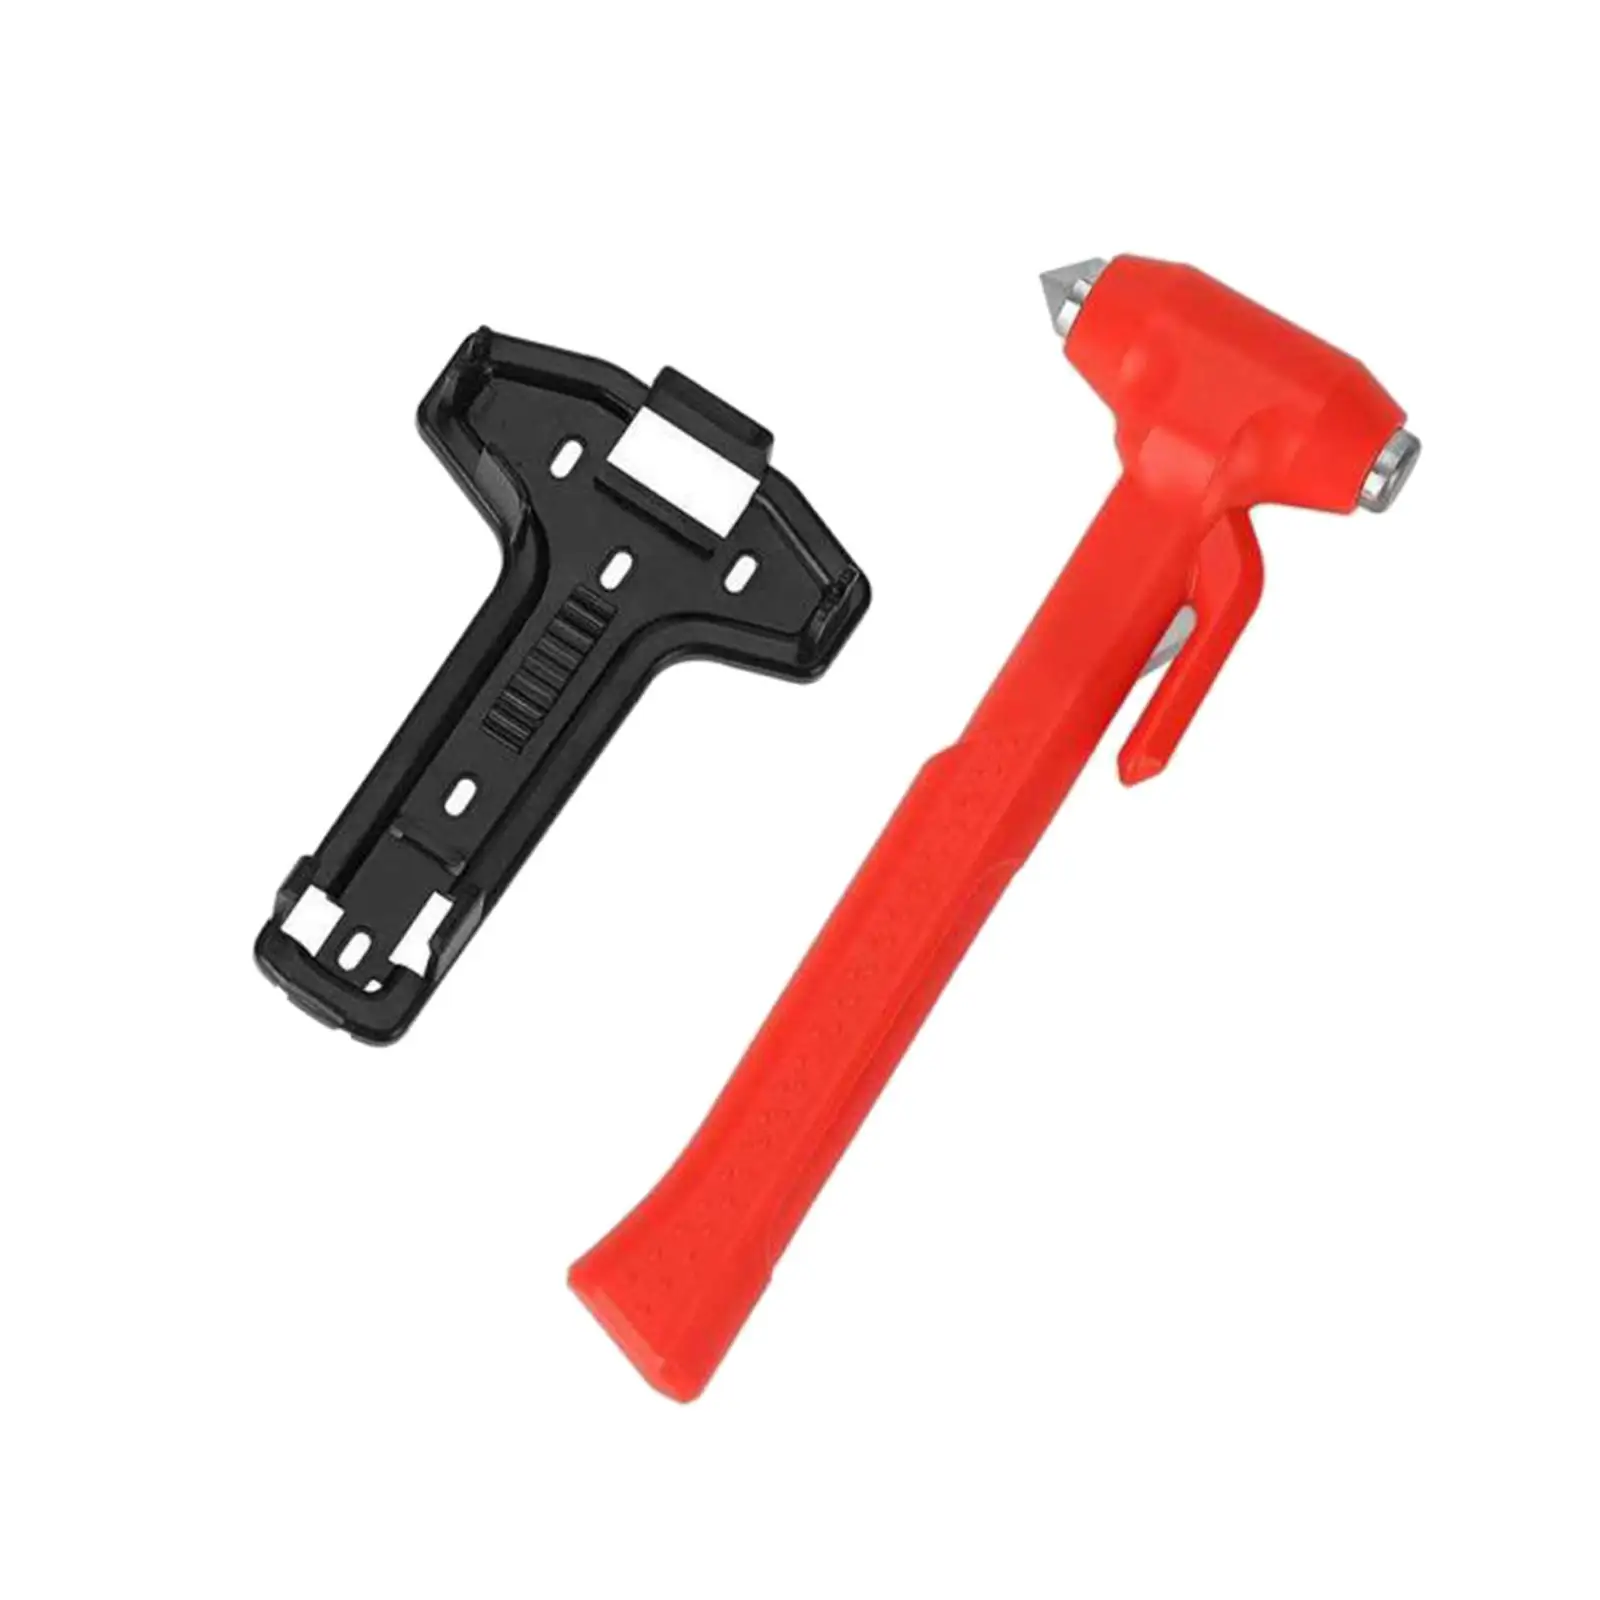 Vehicle Safety Hammer Tool Compact Seat Belt Cutter for Cars Bus Red